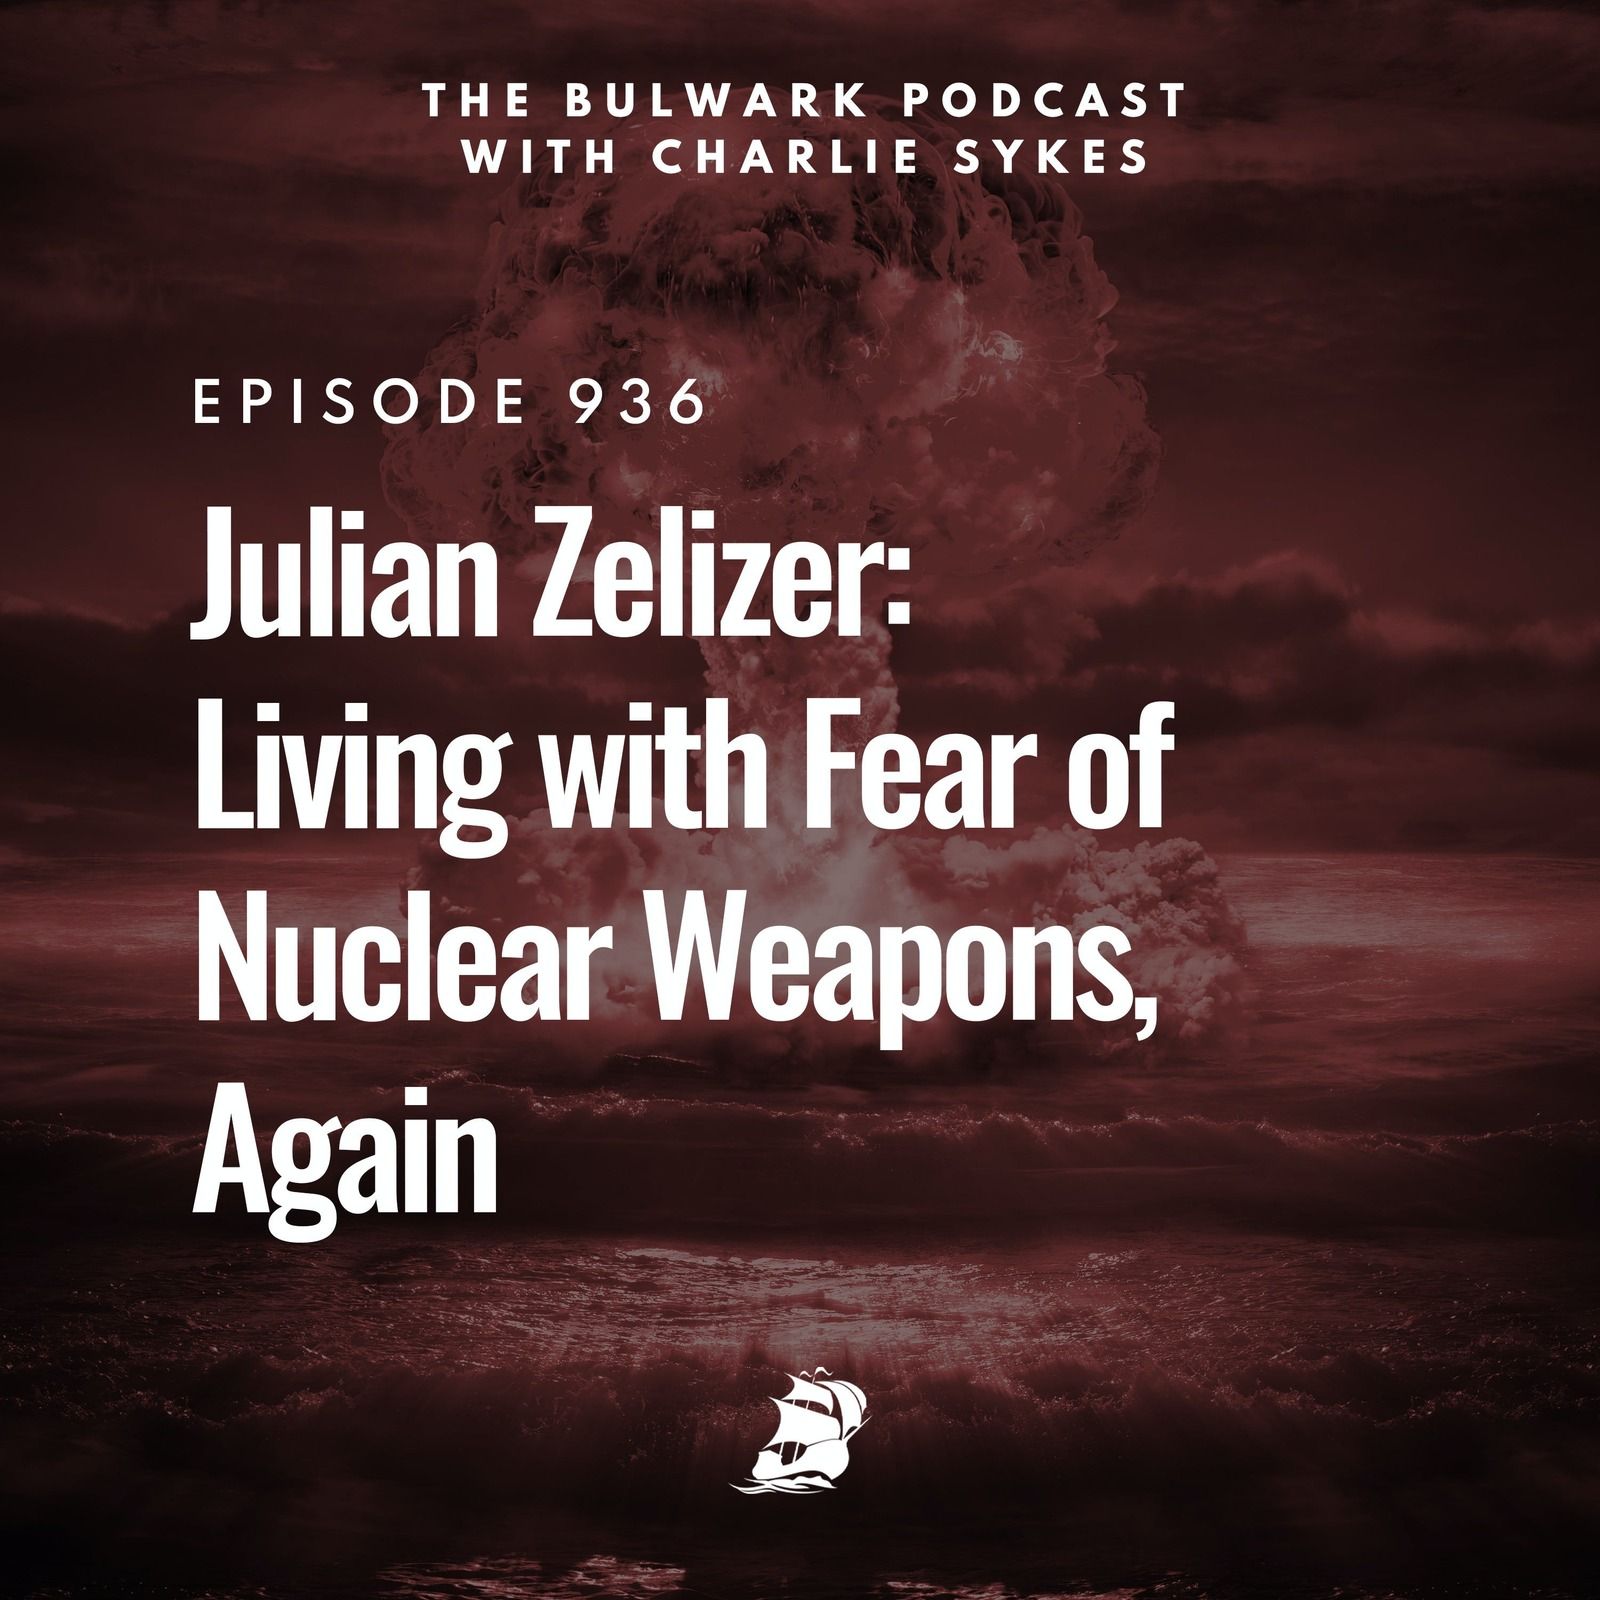 Julian Zelizer: Living with Fear of Nuclear Weapons, Again by The Bulwark Podcast